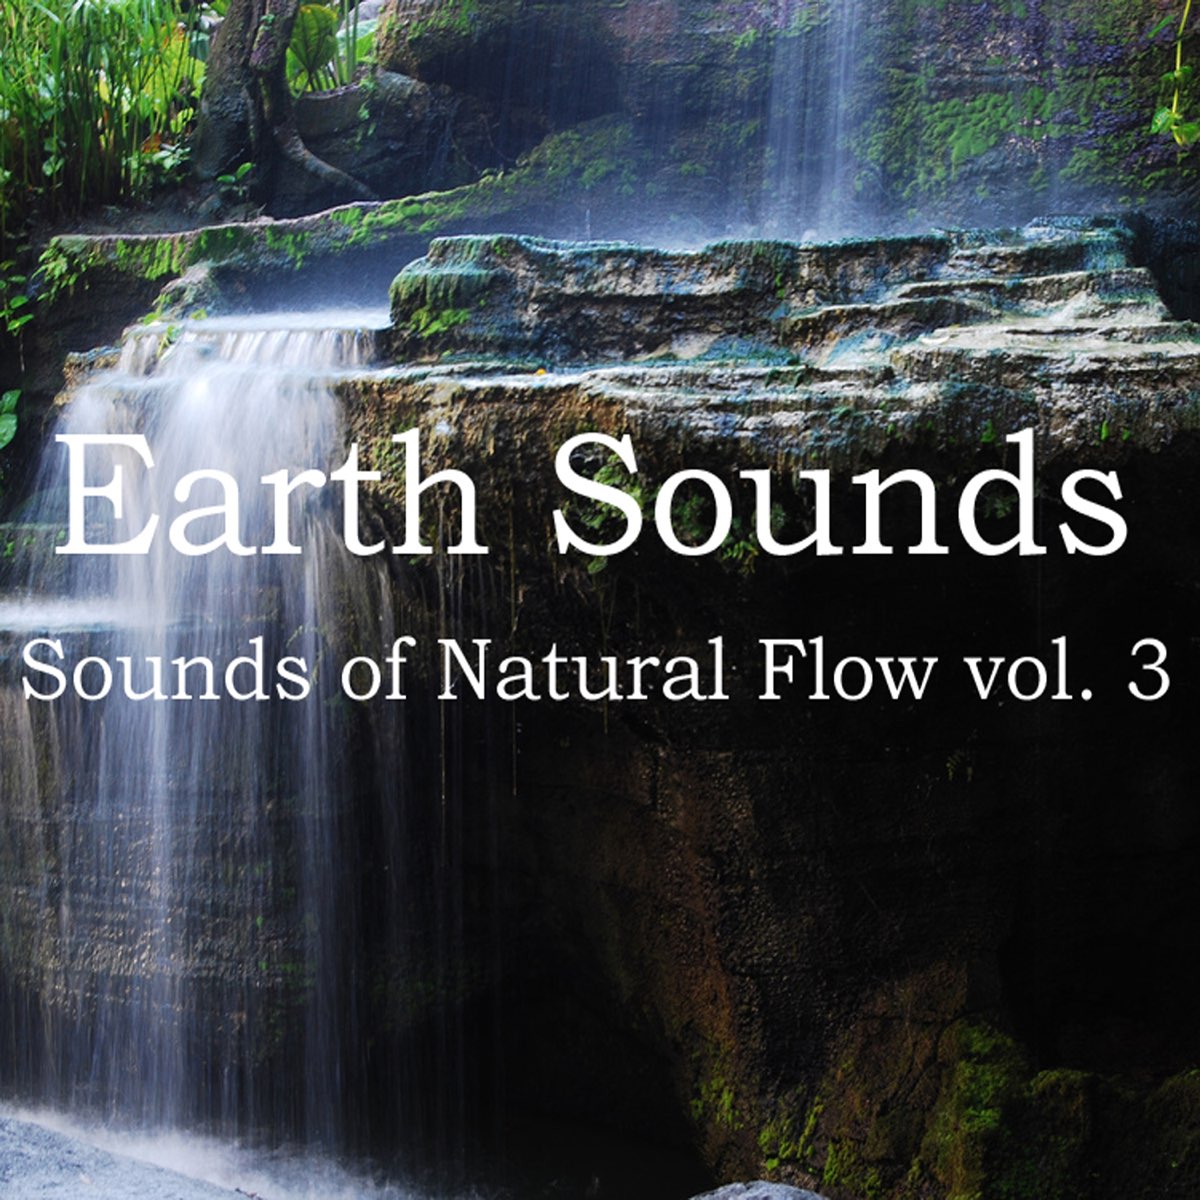 Natural flow. Earth Flow. Earth Sound. Earth sounding. Pebbles - Prophetic Flows Vol i & II.